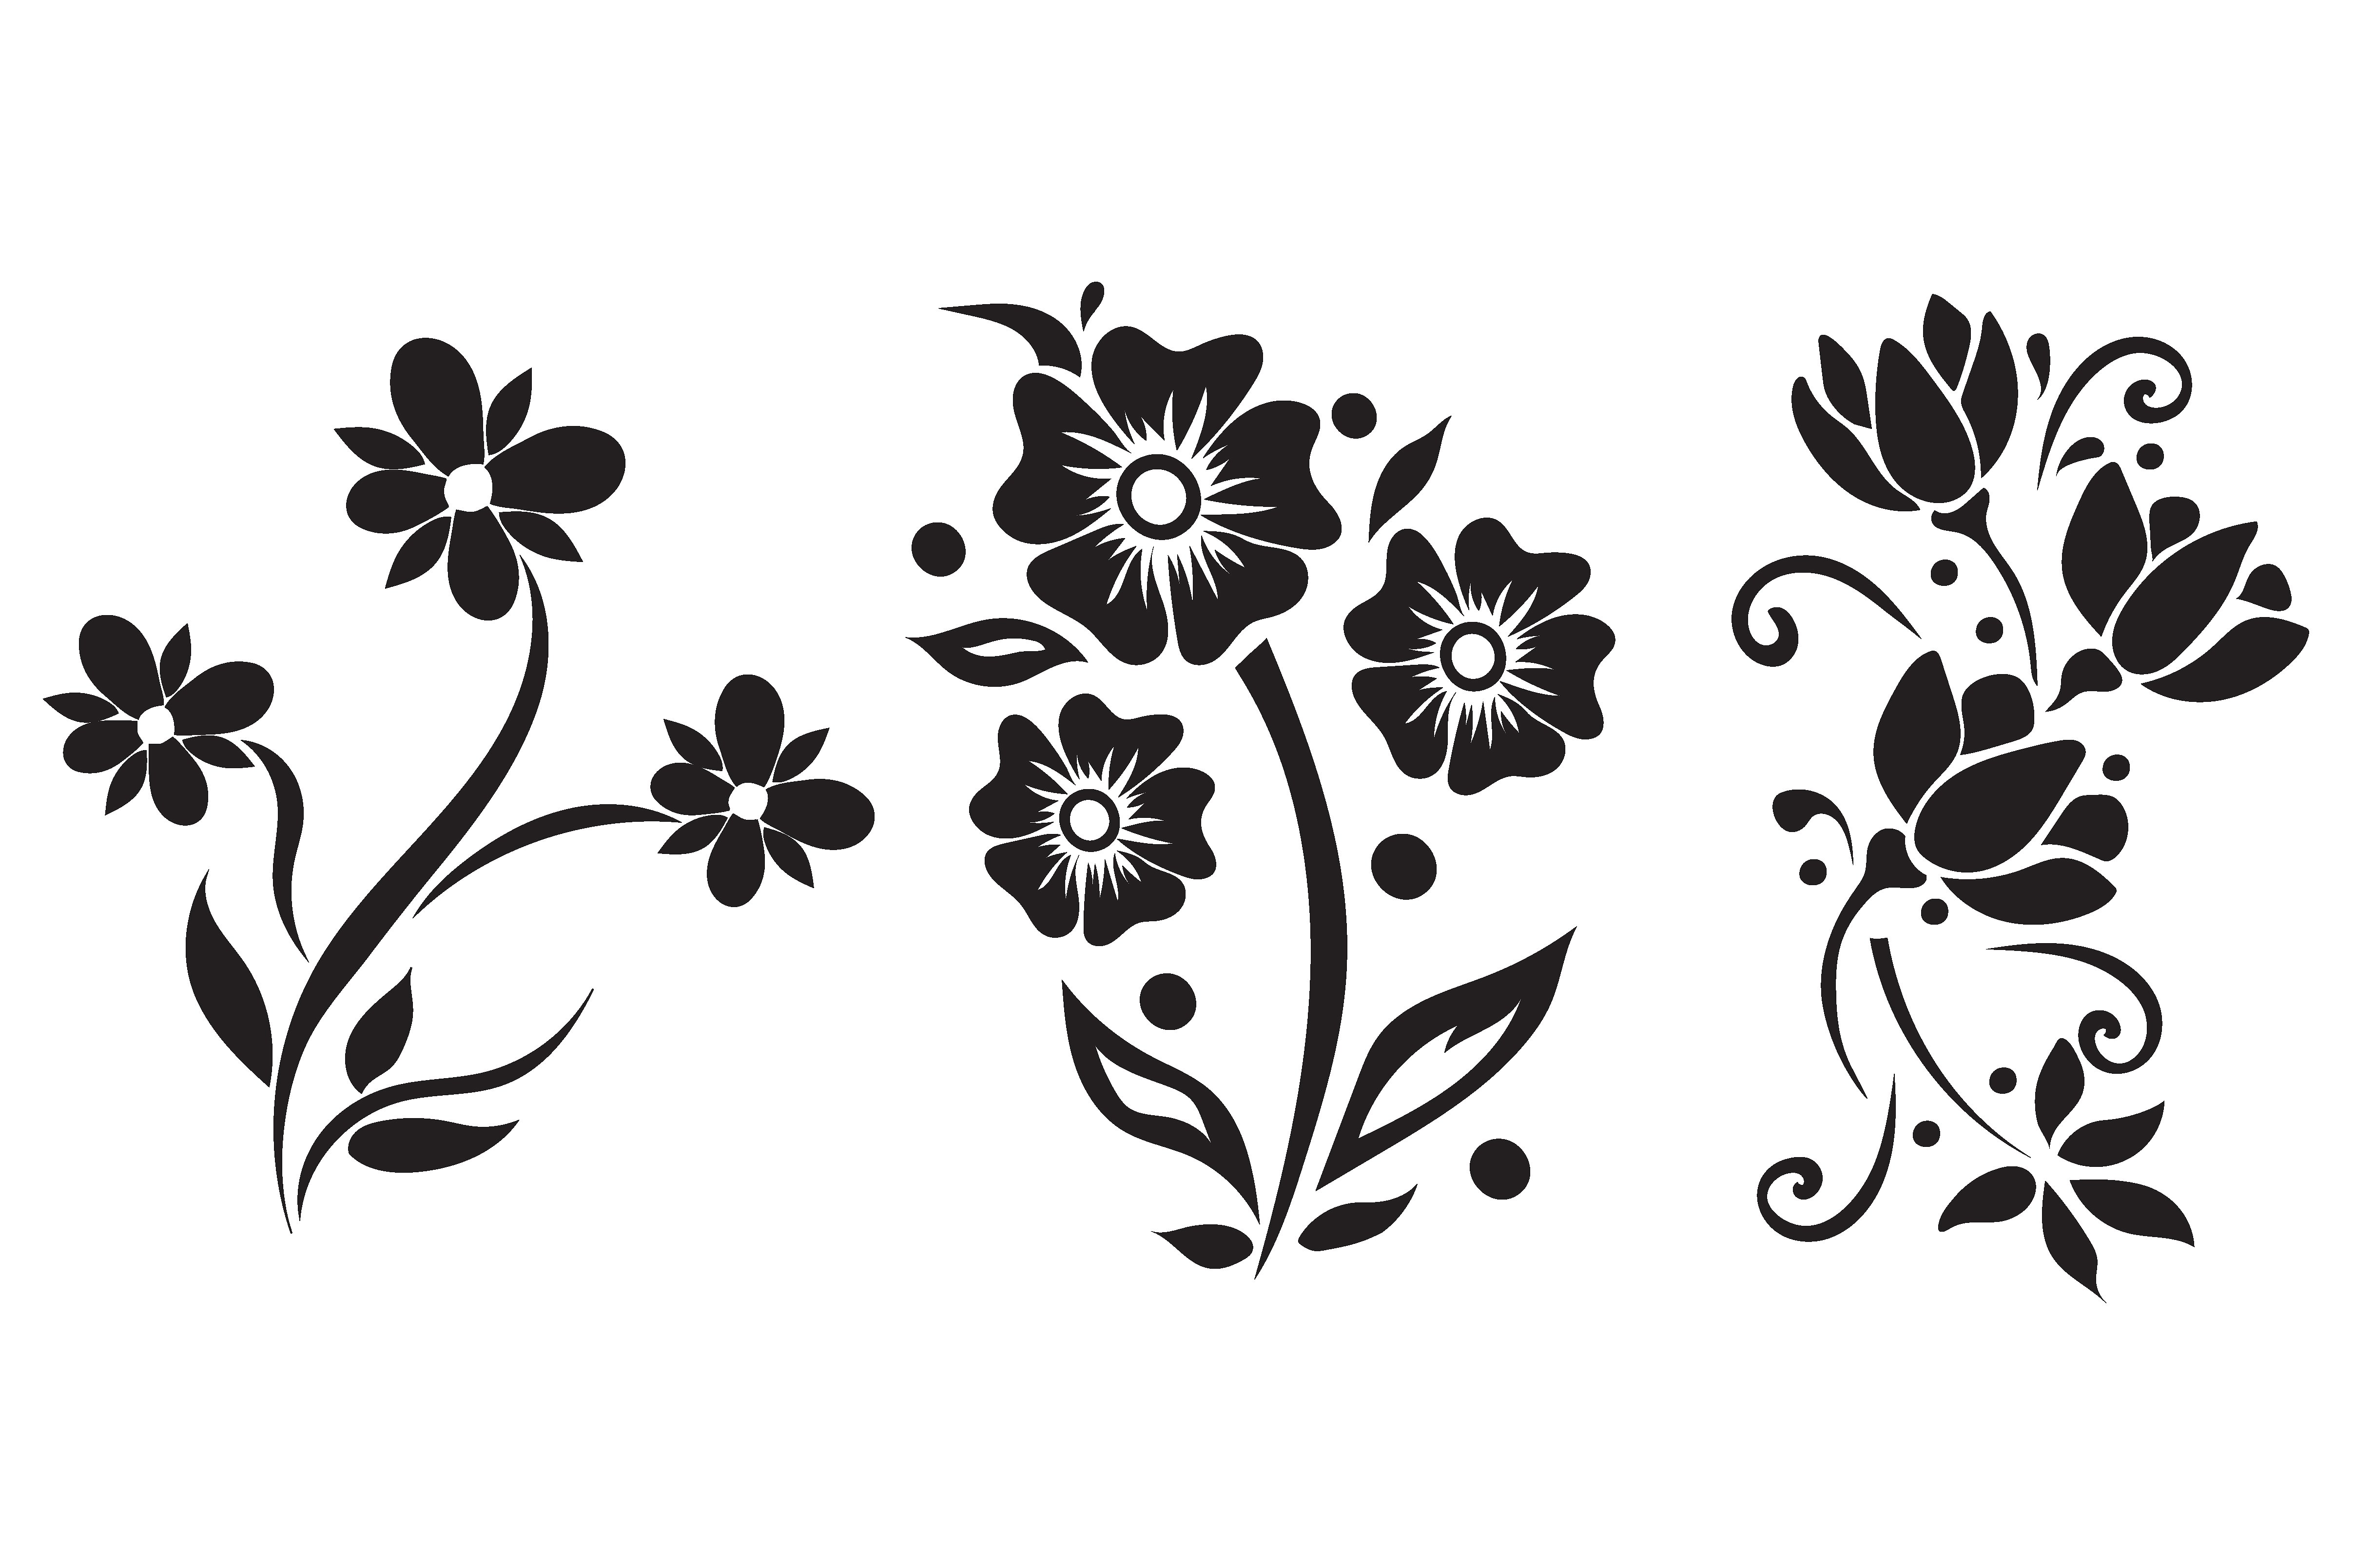 Download Free photo: Flower Icons - Botanical, Clipart, Daisies ...